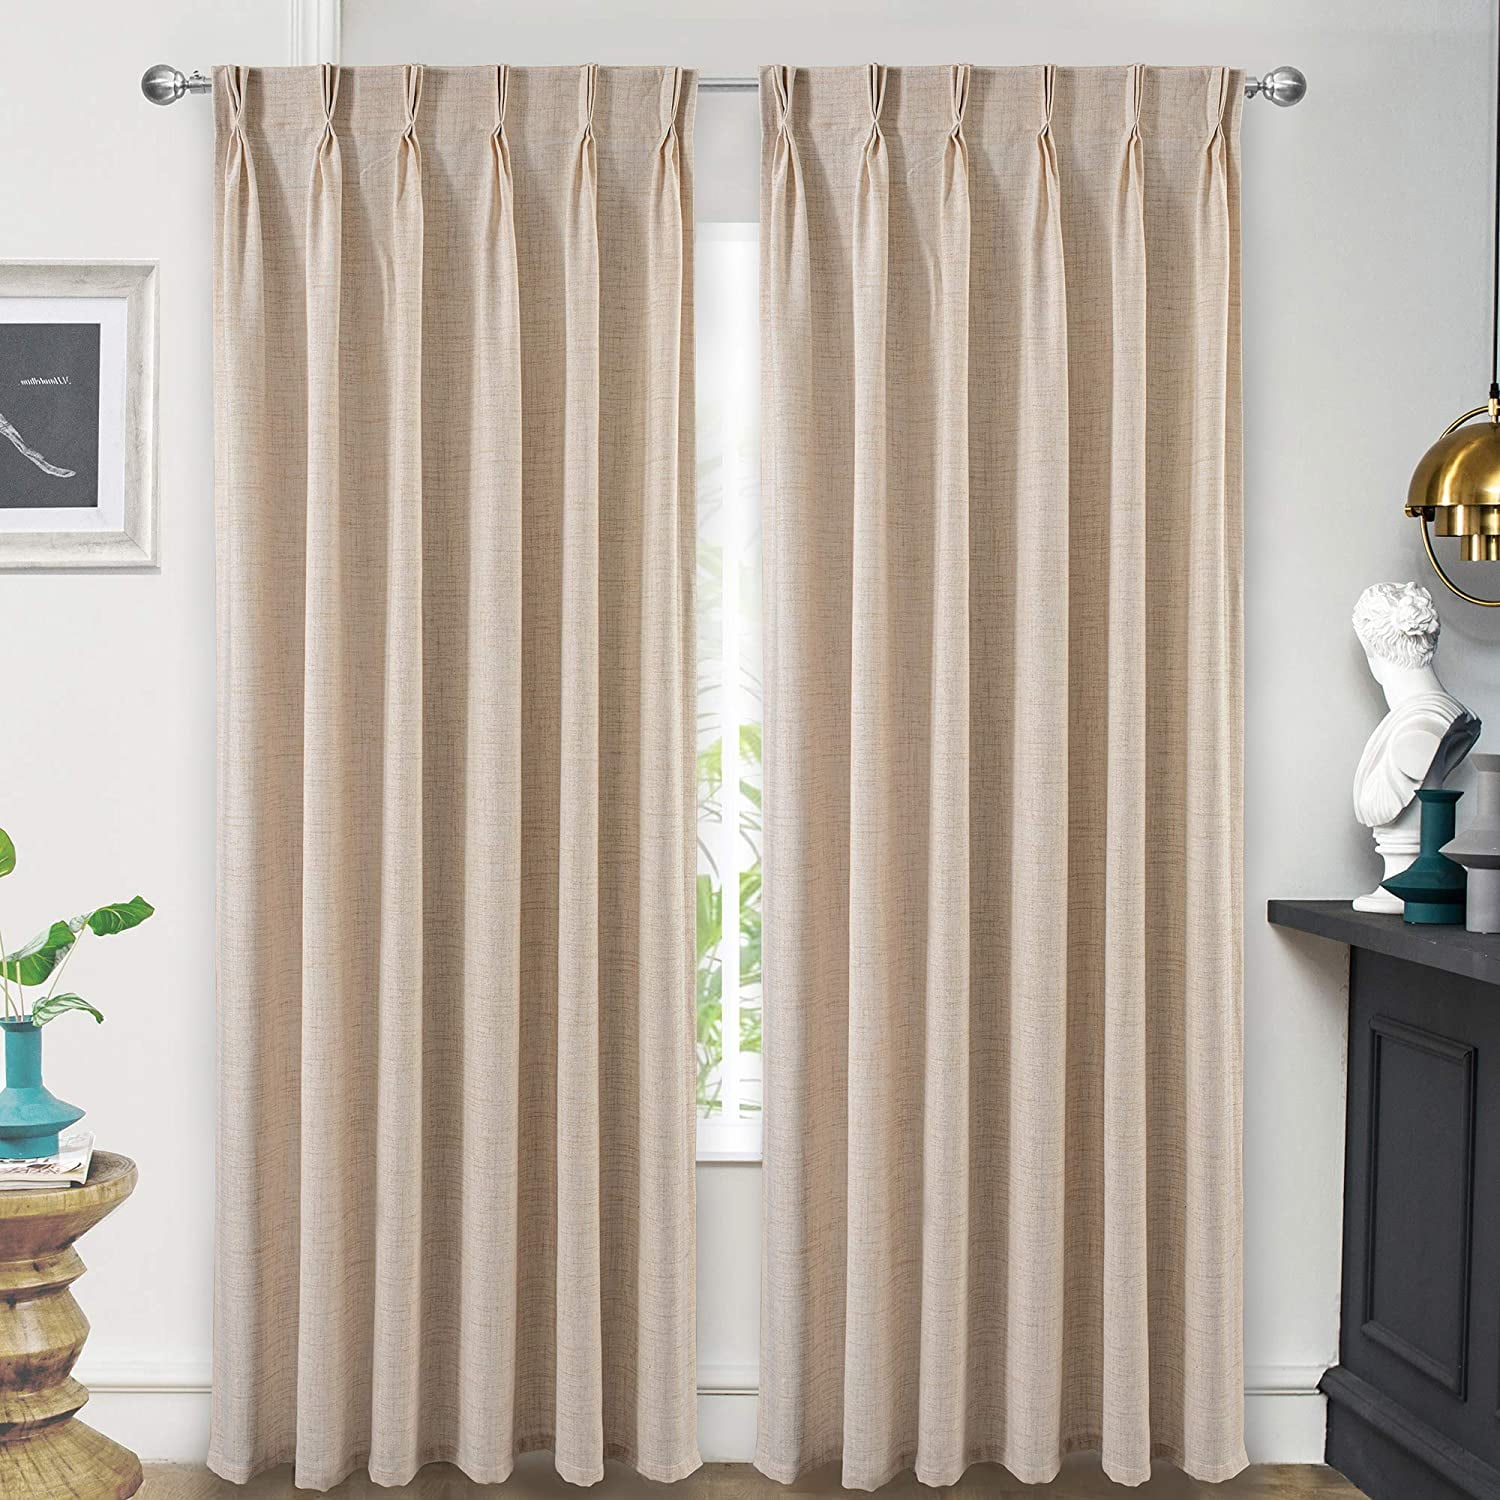 Cream Pencil Pleat Jacquard Leaf Lined Curtains With Free Tie Backs 9 Sizes 